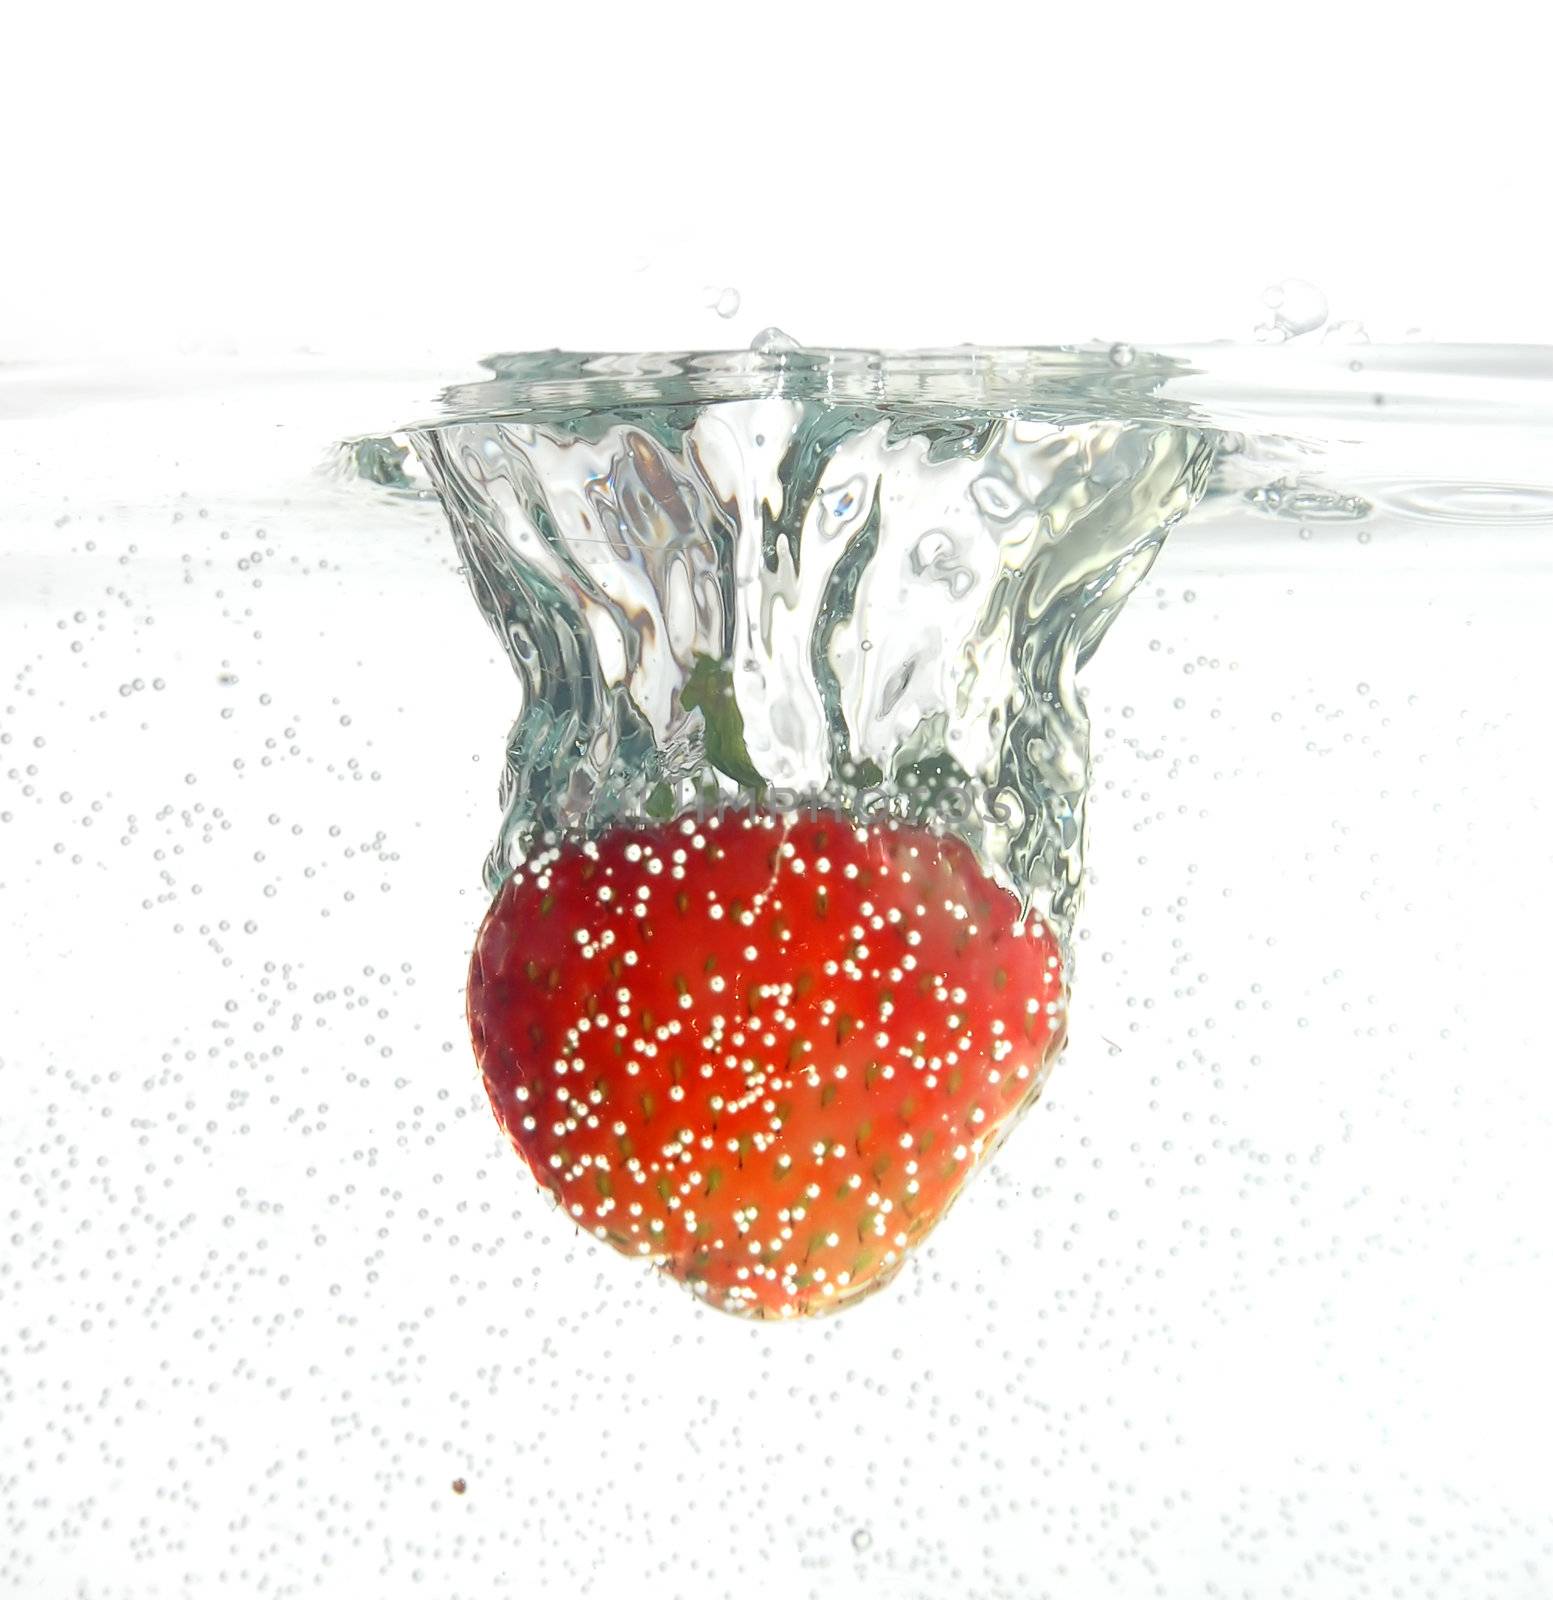 Strawberry in water by photocreo